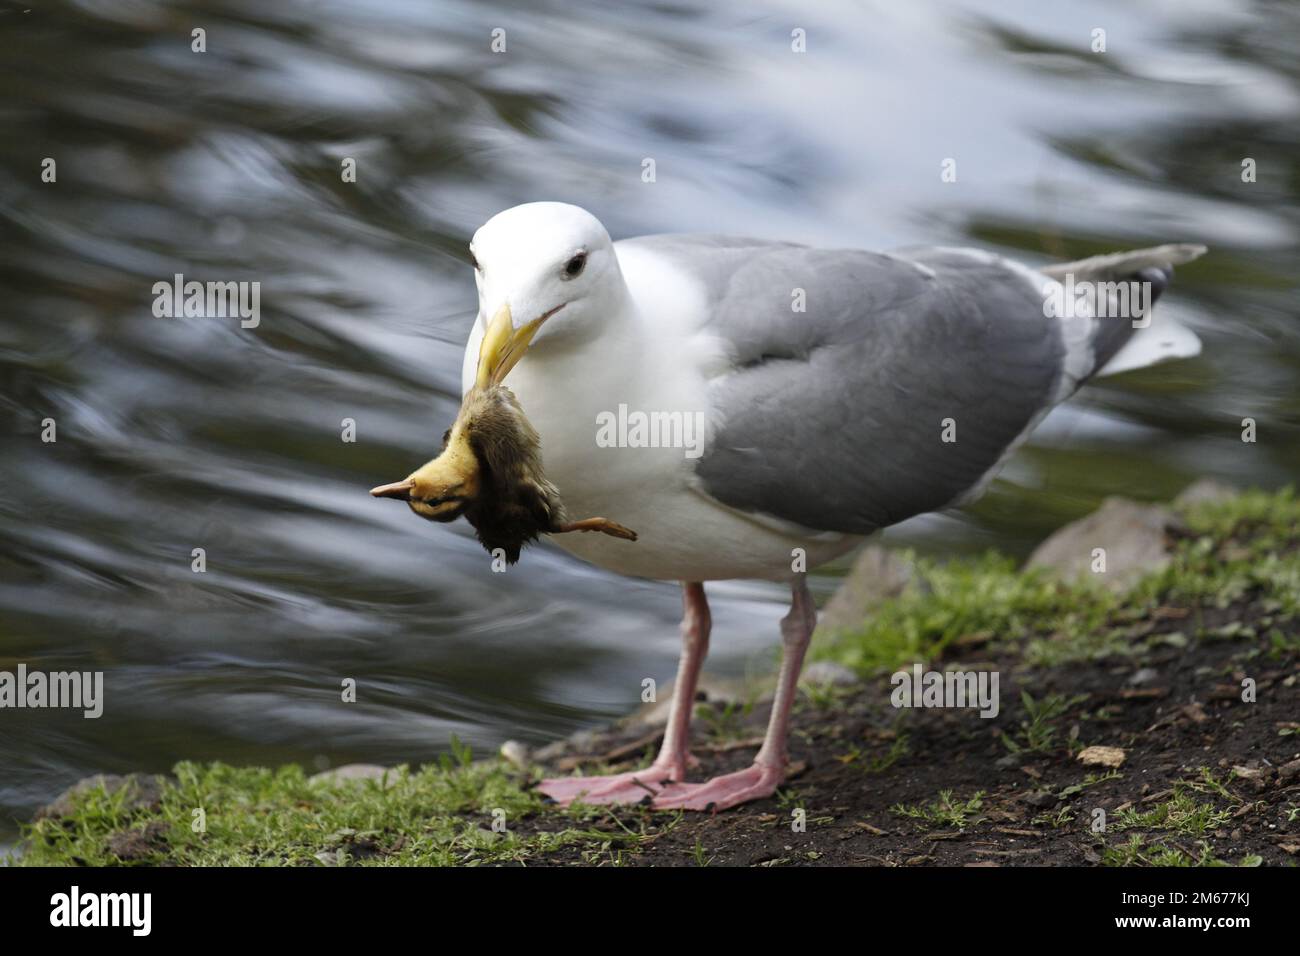 A Glaucous-winged Gull (Larus glaucescens) catching and eating a mallard duckling on land beside water. The baby duck is hanging from the gull's beak. Stock Photo